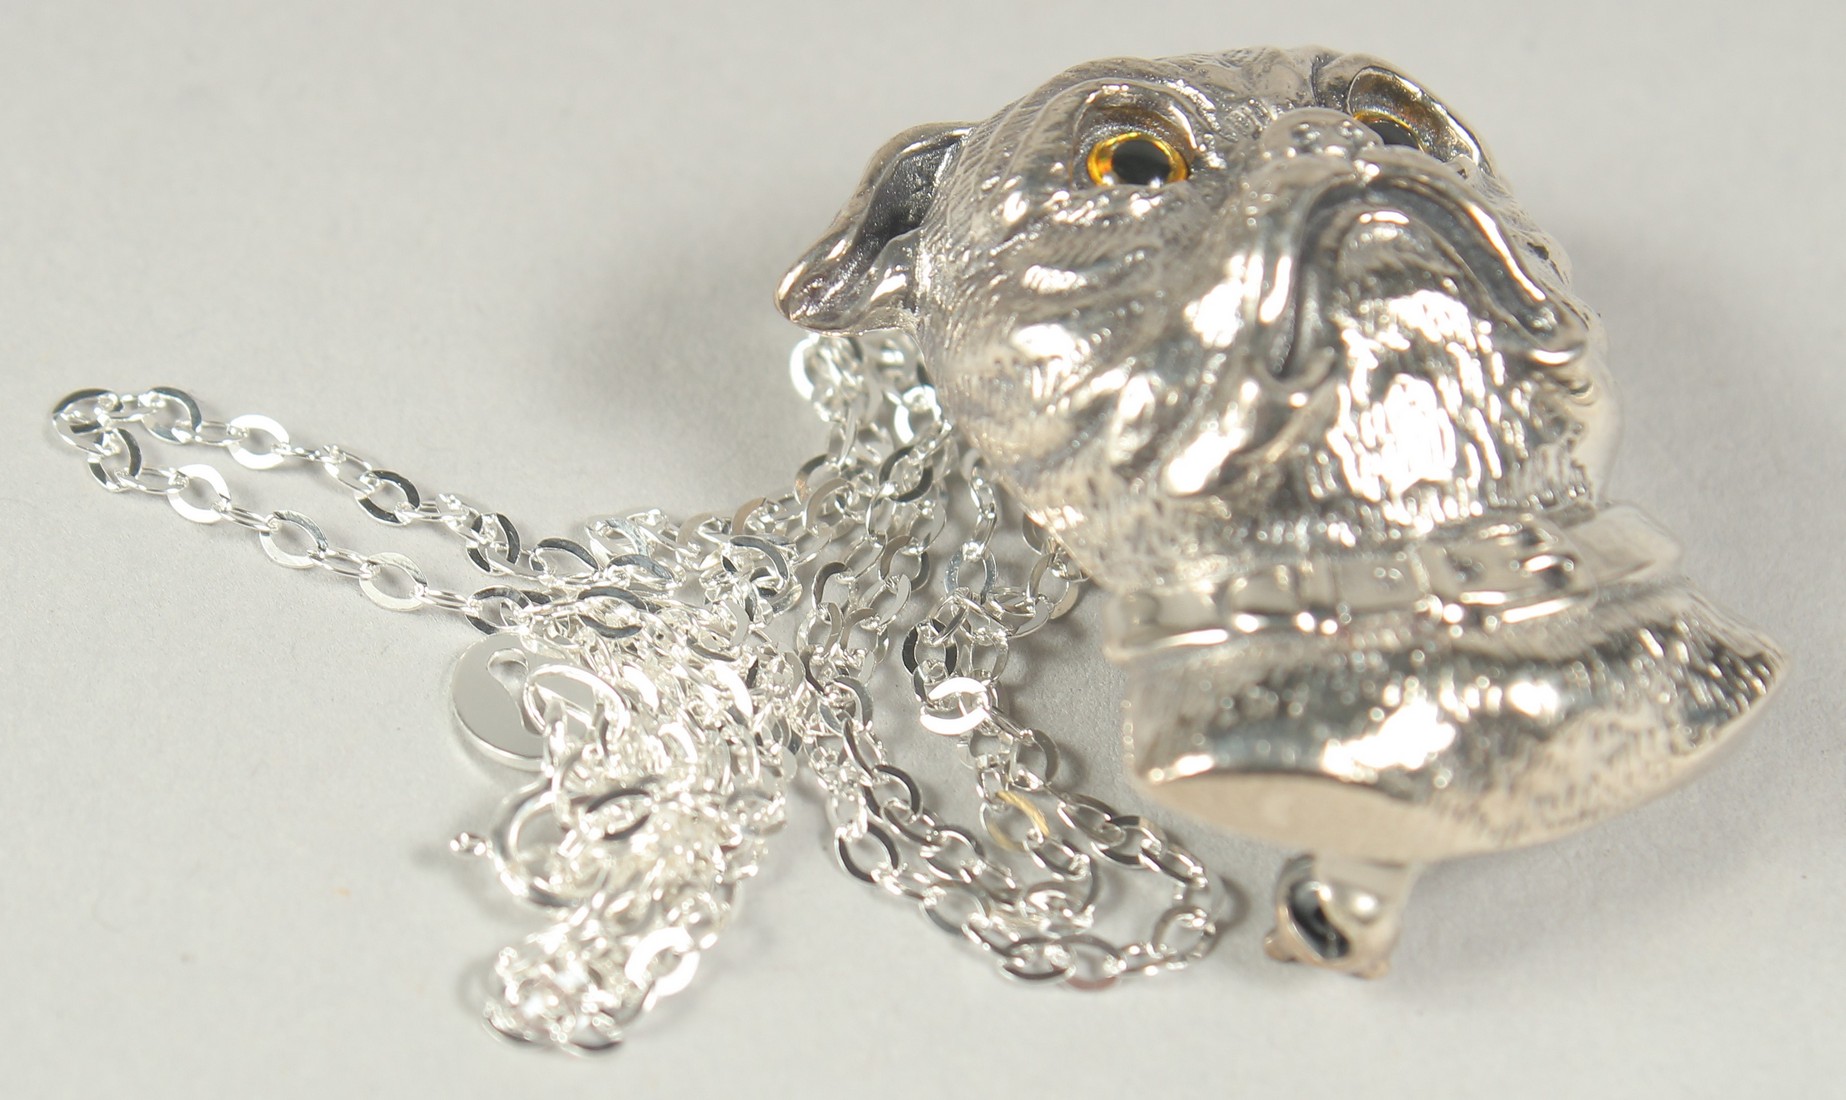 A silver pug dog brooch or pendant on a chain in a box. - Image 3 of 3